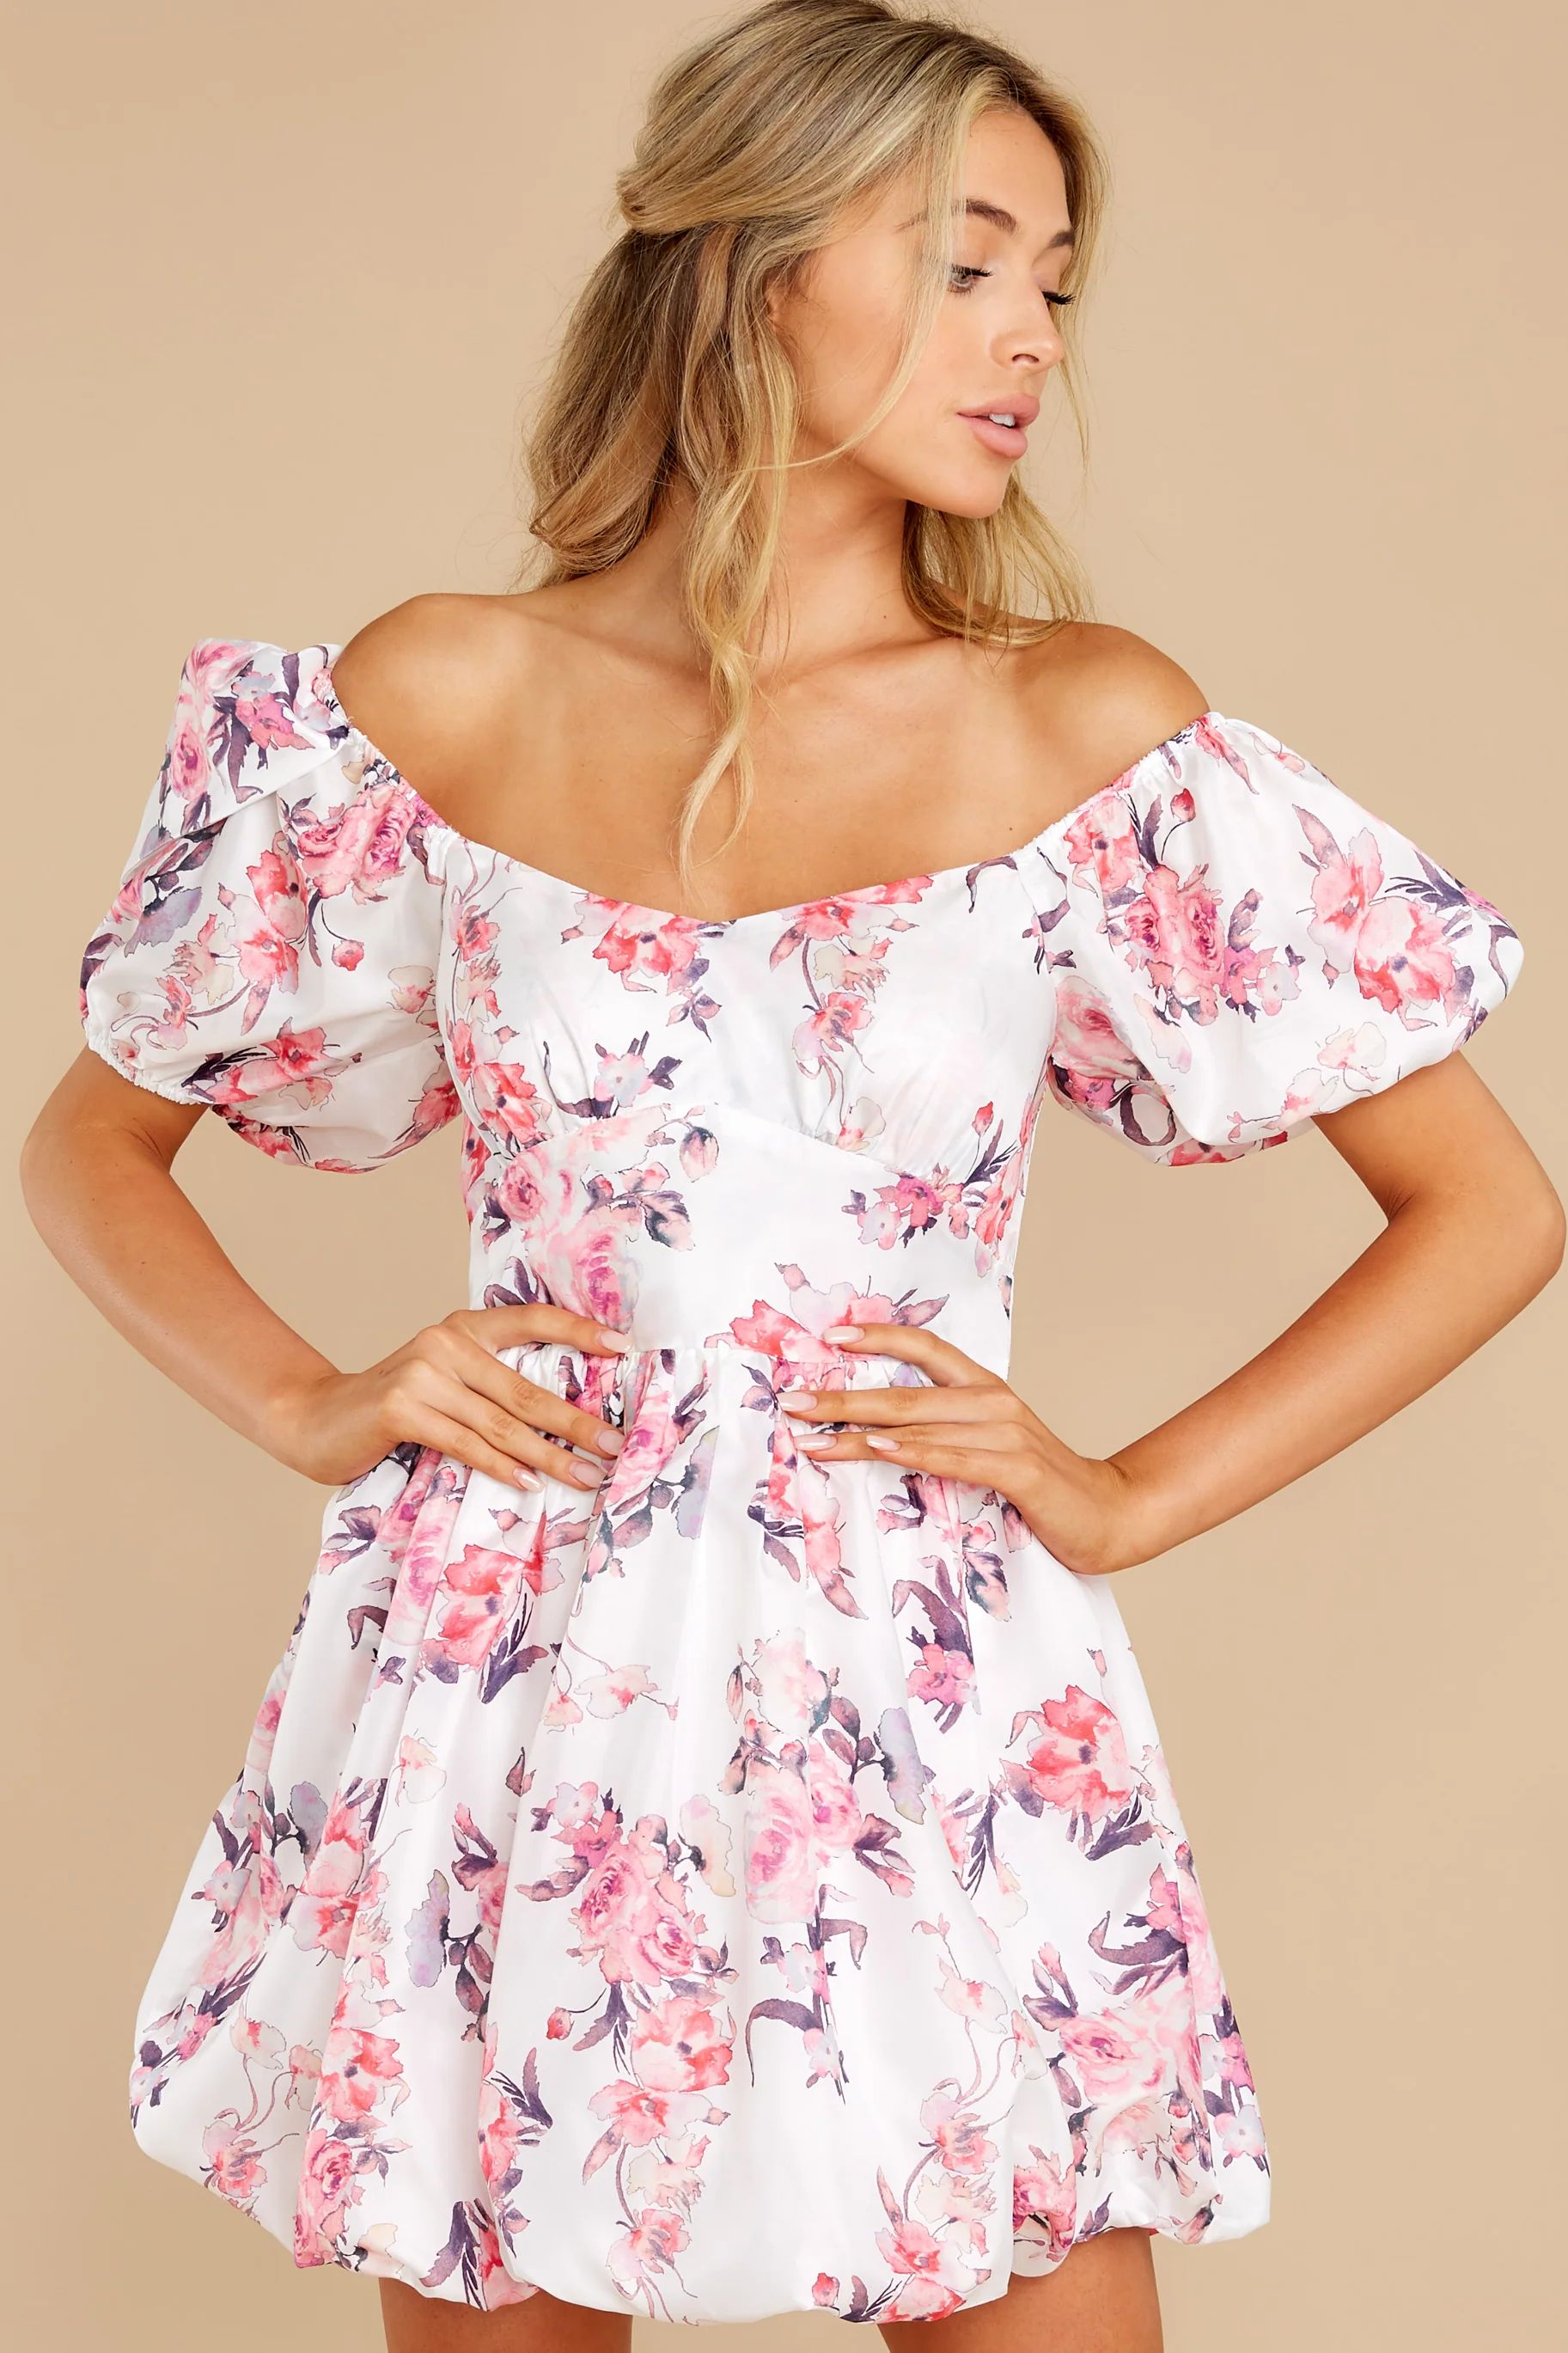 Spring In Your Step White Floral Print Dress | Red Dress 